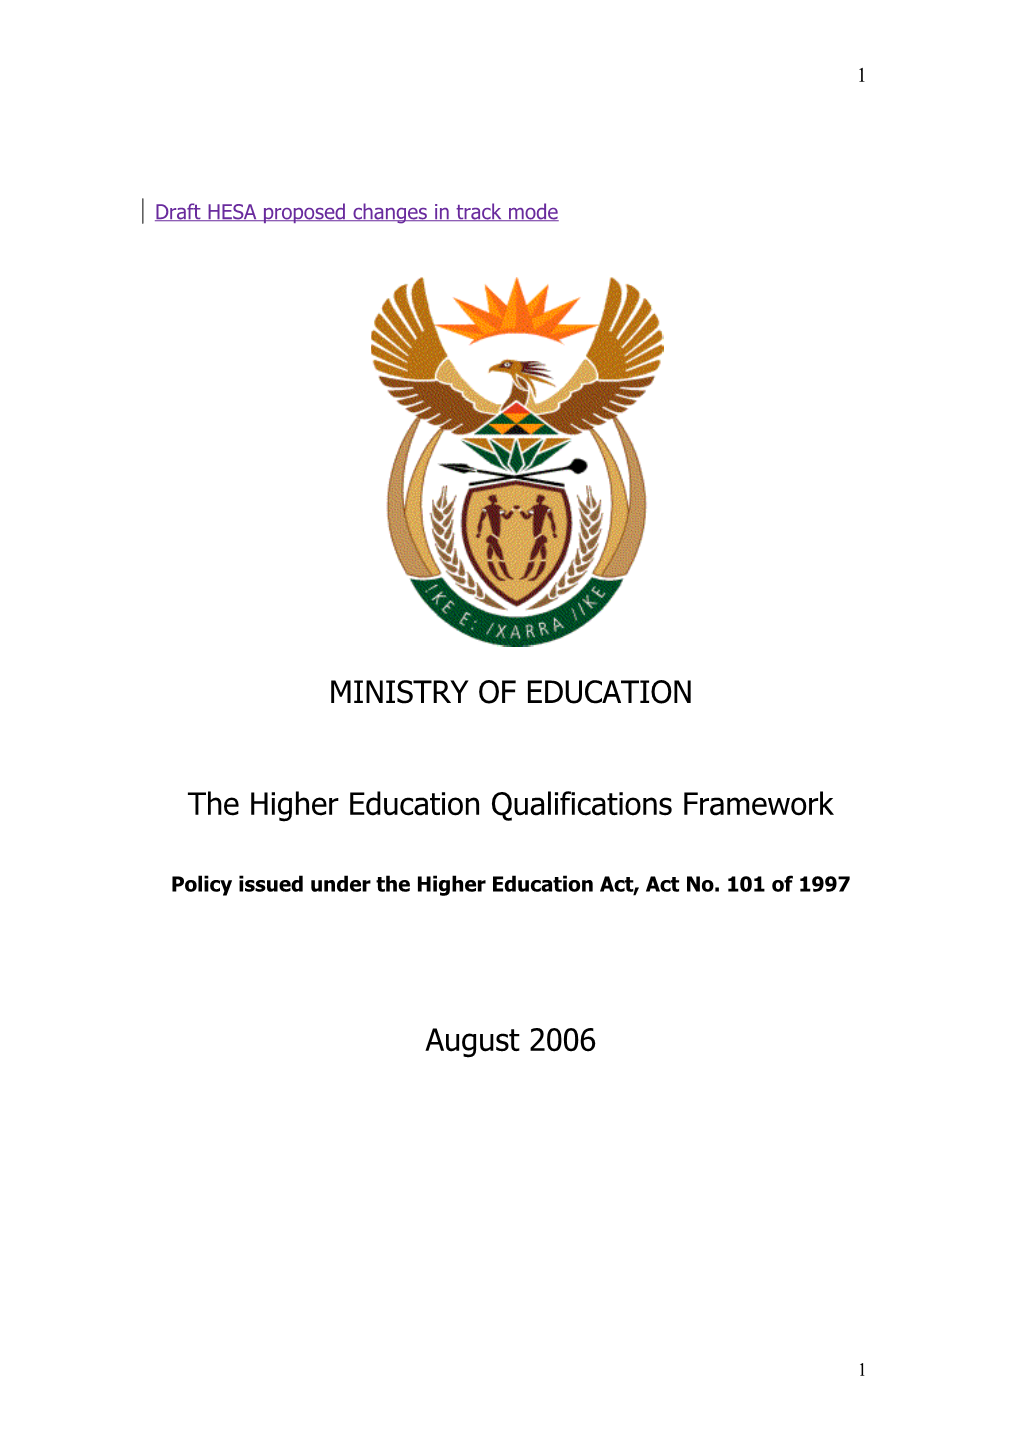 A Framework for Programmes and Qualifications for Higher Edcuation